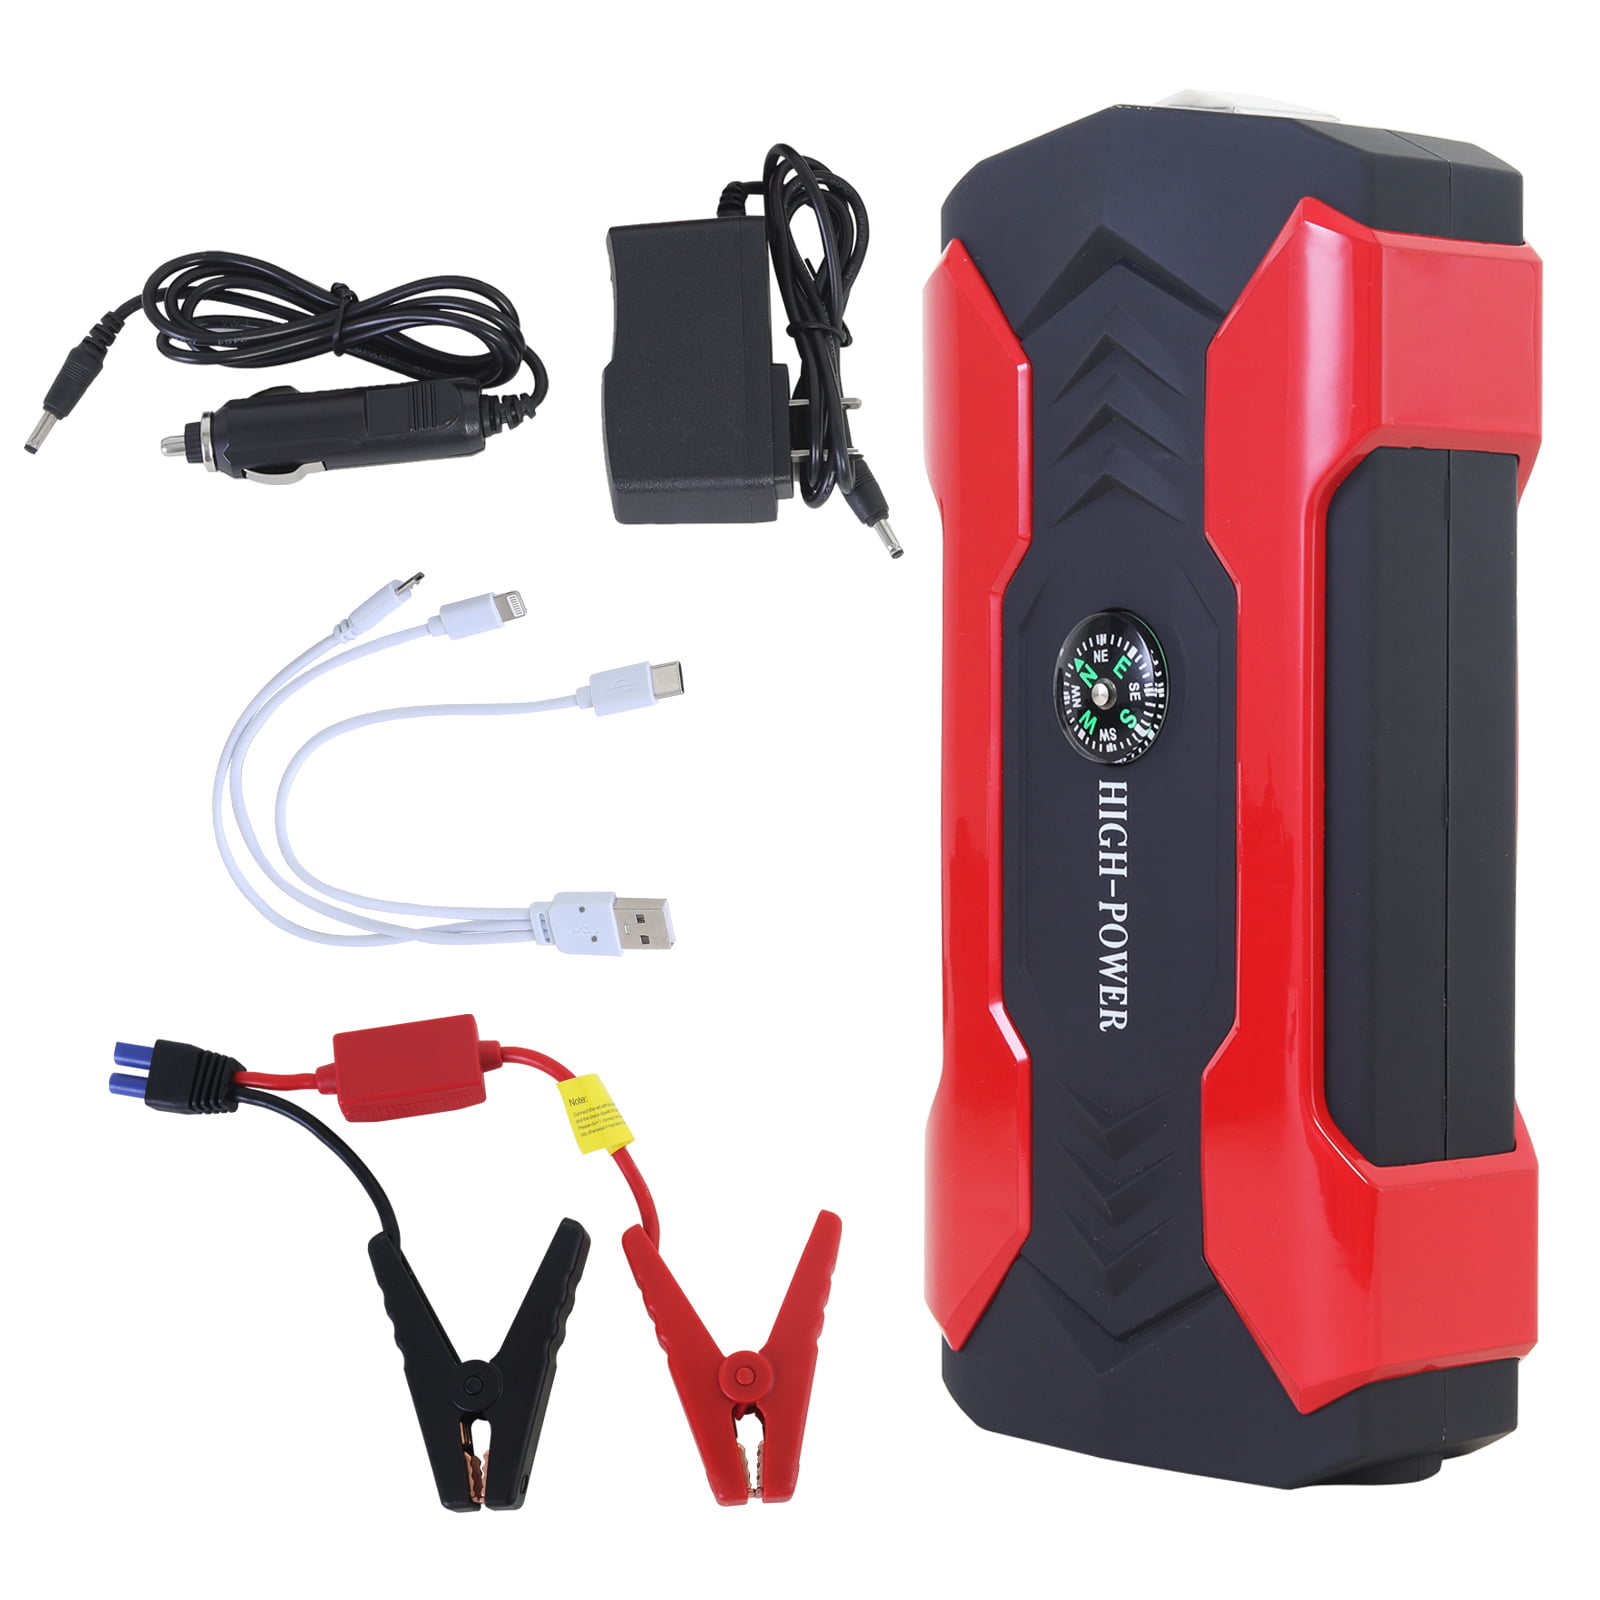 Car Jump Starter 3000A Peak Jump Boxes for Vehicles(12V 8L Gas/6.5L Diesel  Engine), Portable 20000mAh Power Bank, Equipped Fast Charging Jump Starter